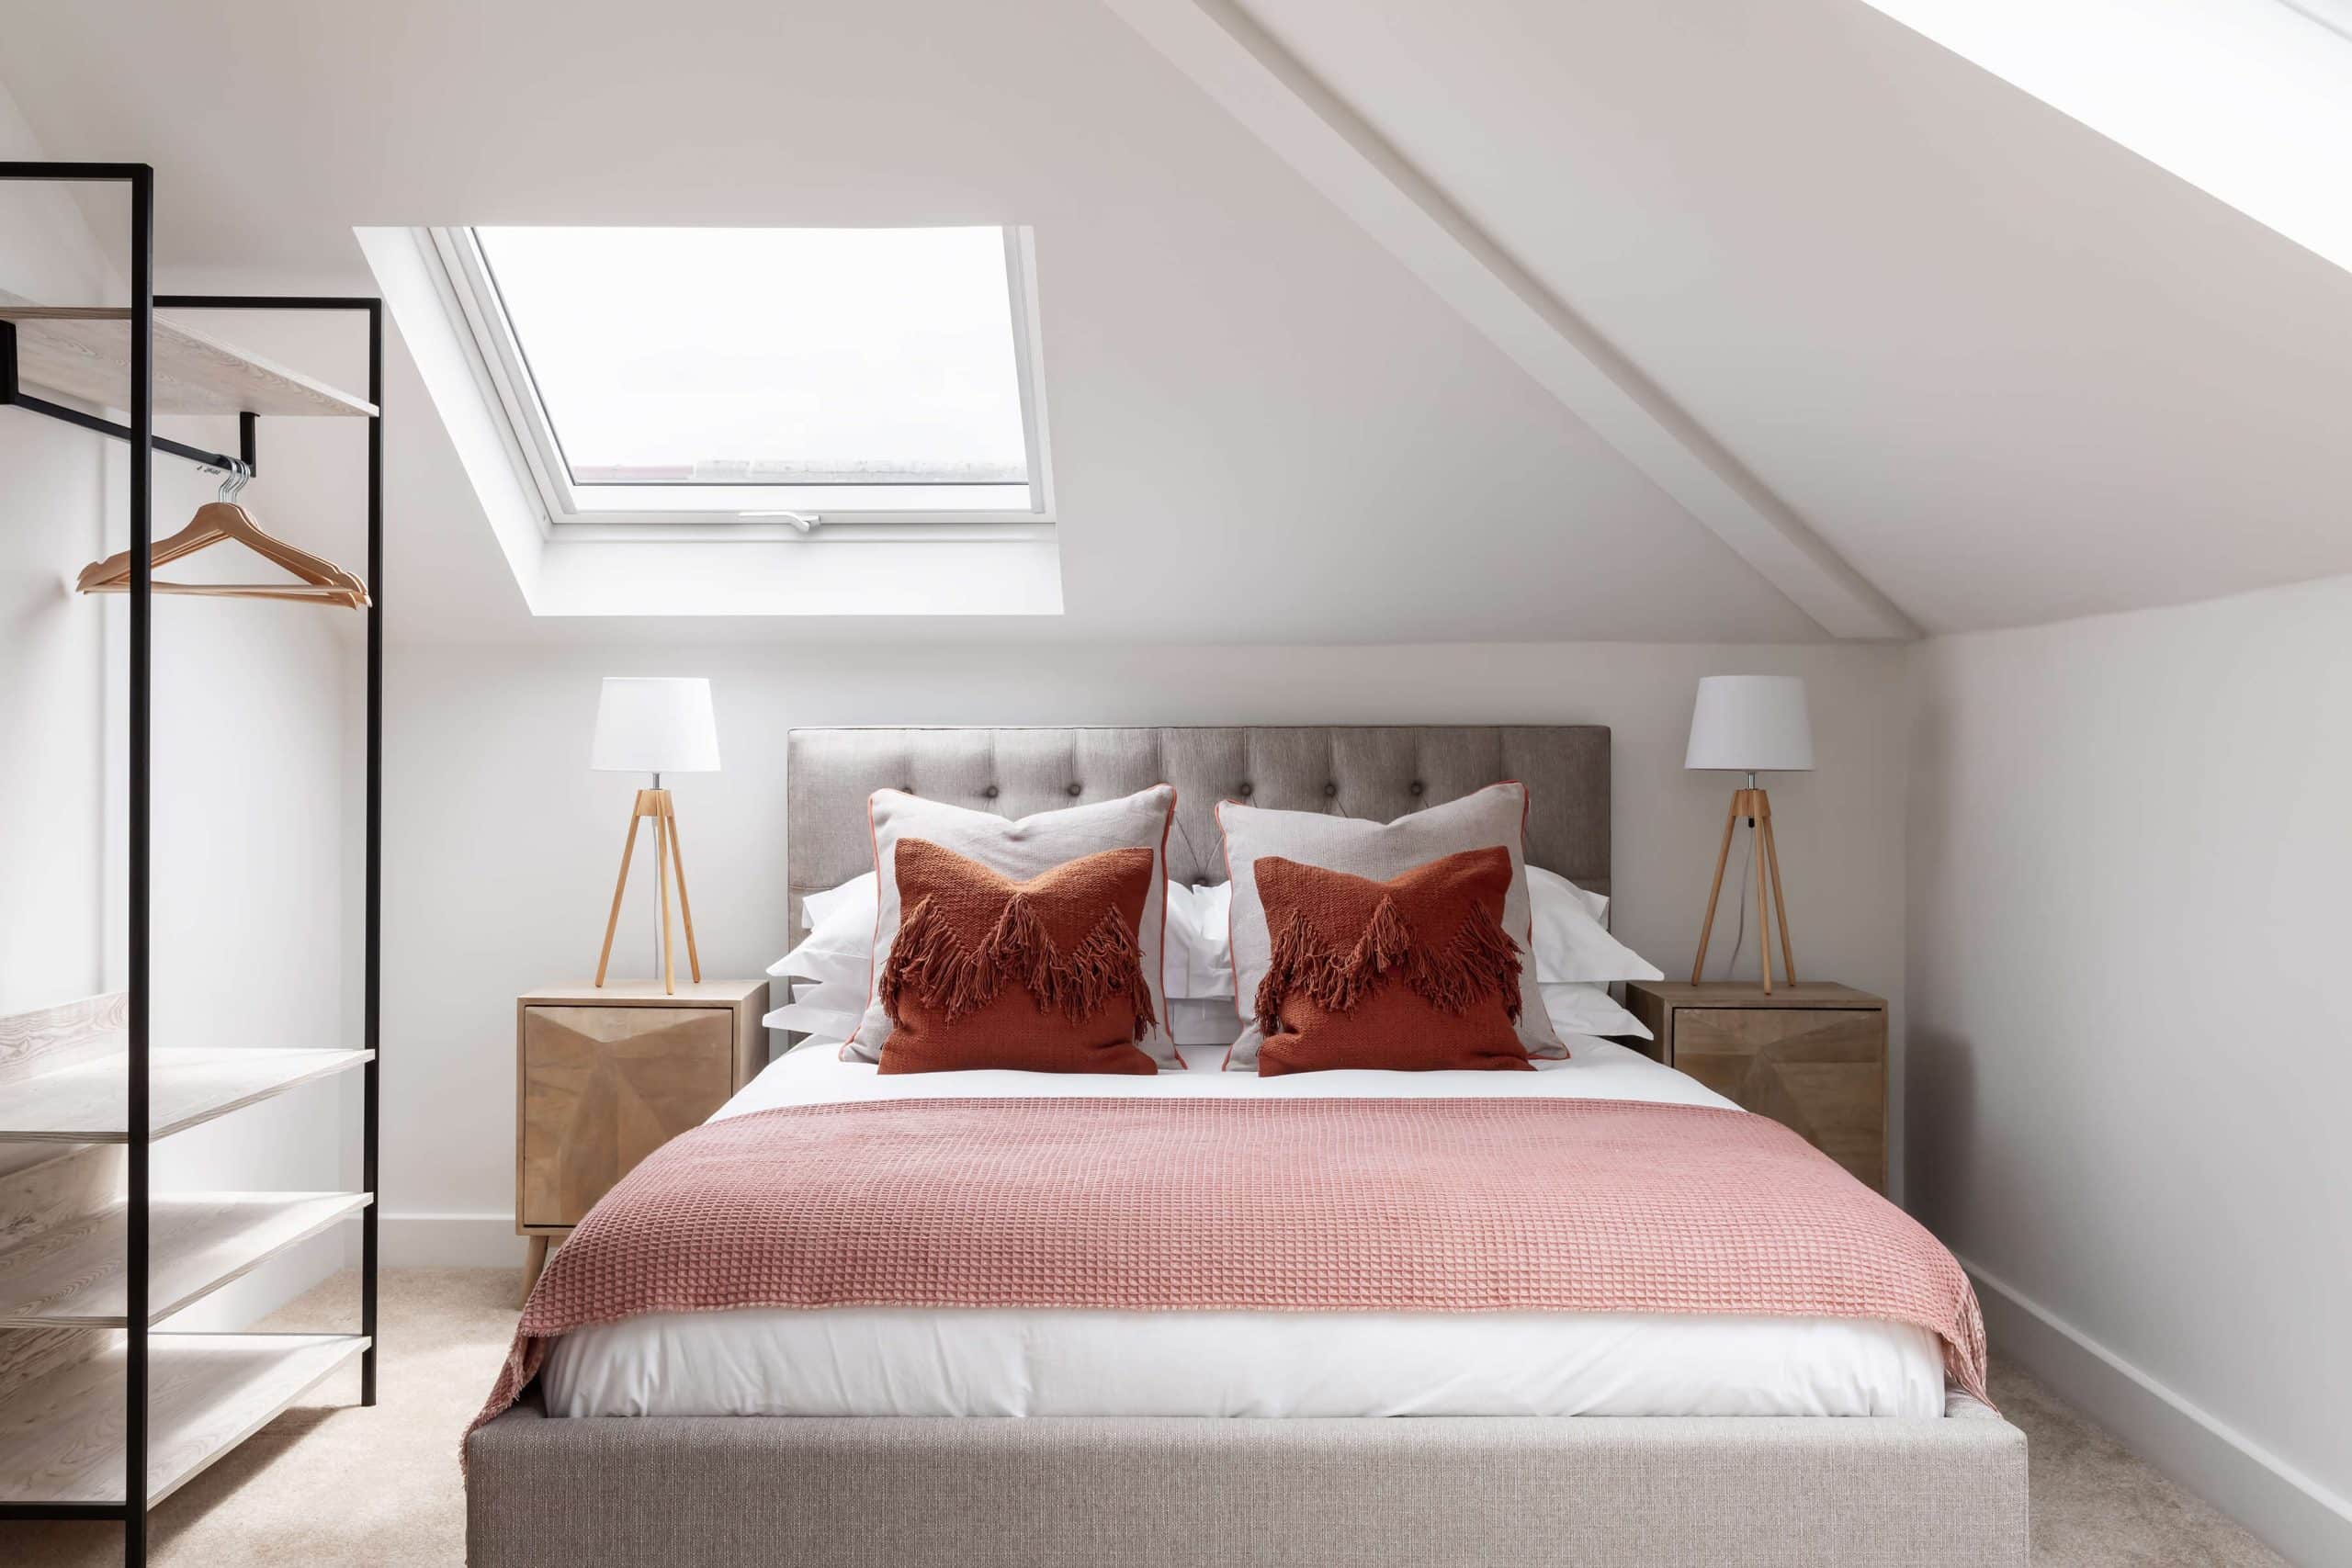 Master bedroom of muted warm tones of dark pink on a light grey bed. Surrounded with symmetrical nightstands and lamps with an empty open wardrobe on the left, under a sunroof window